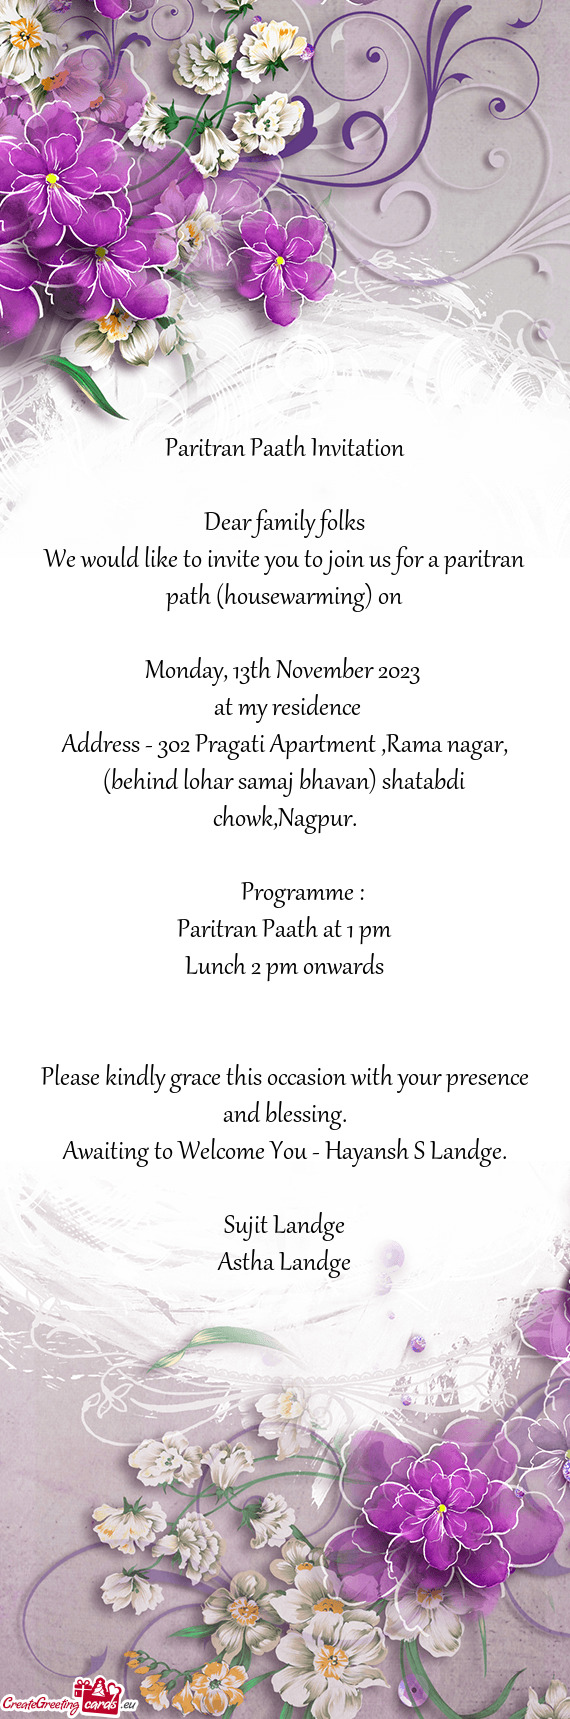 We would like to invite you to join us for a paritran path (housewarming) on